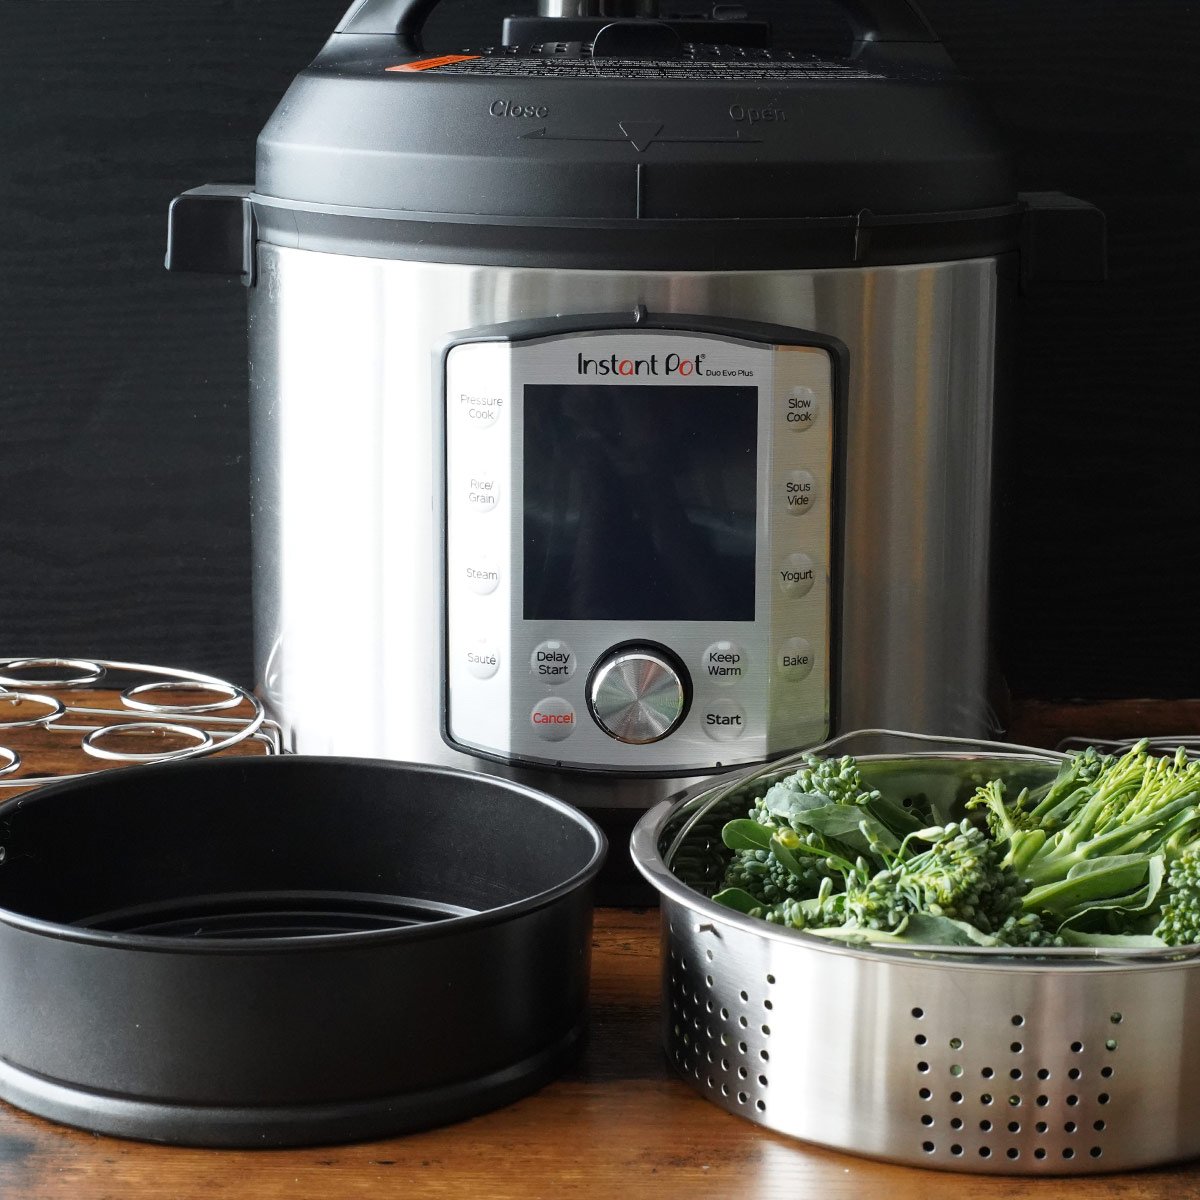 25 Perfect Instant Pot Gift Ideas for 2022